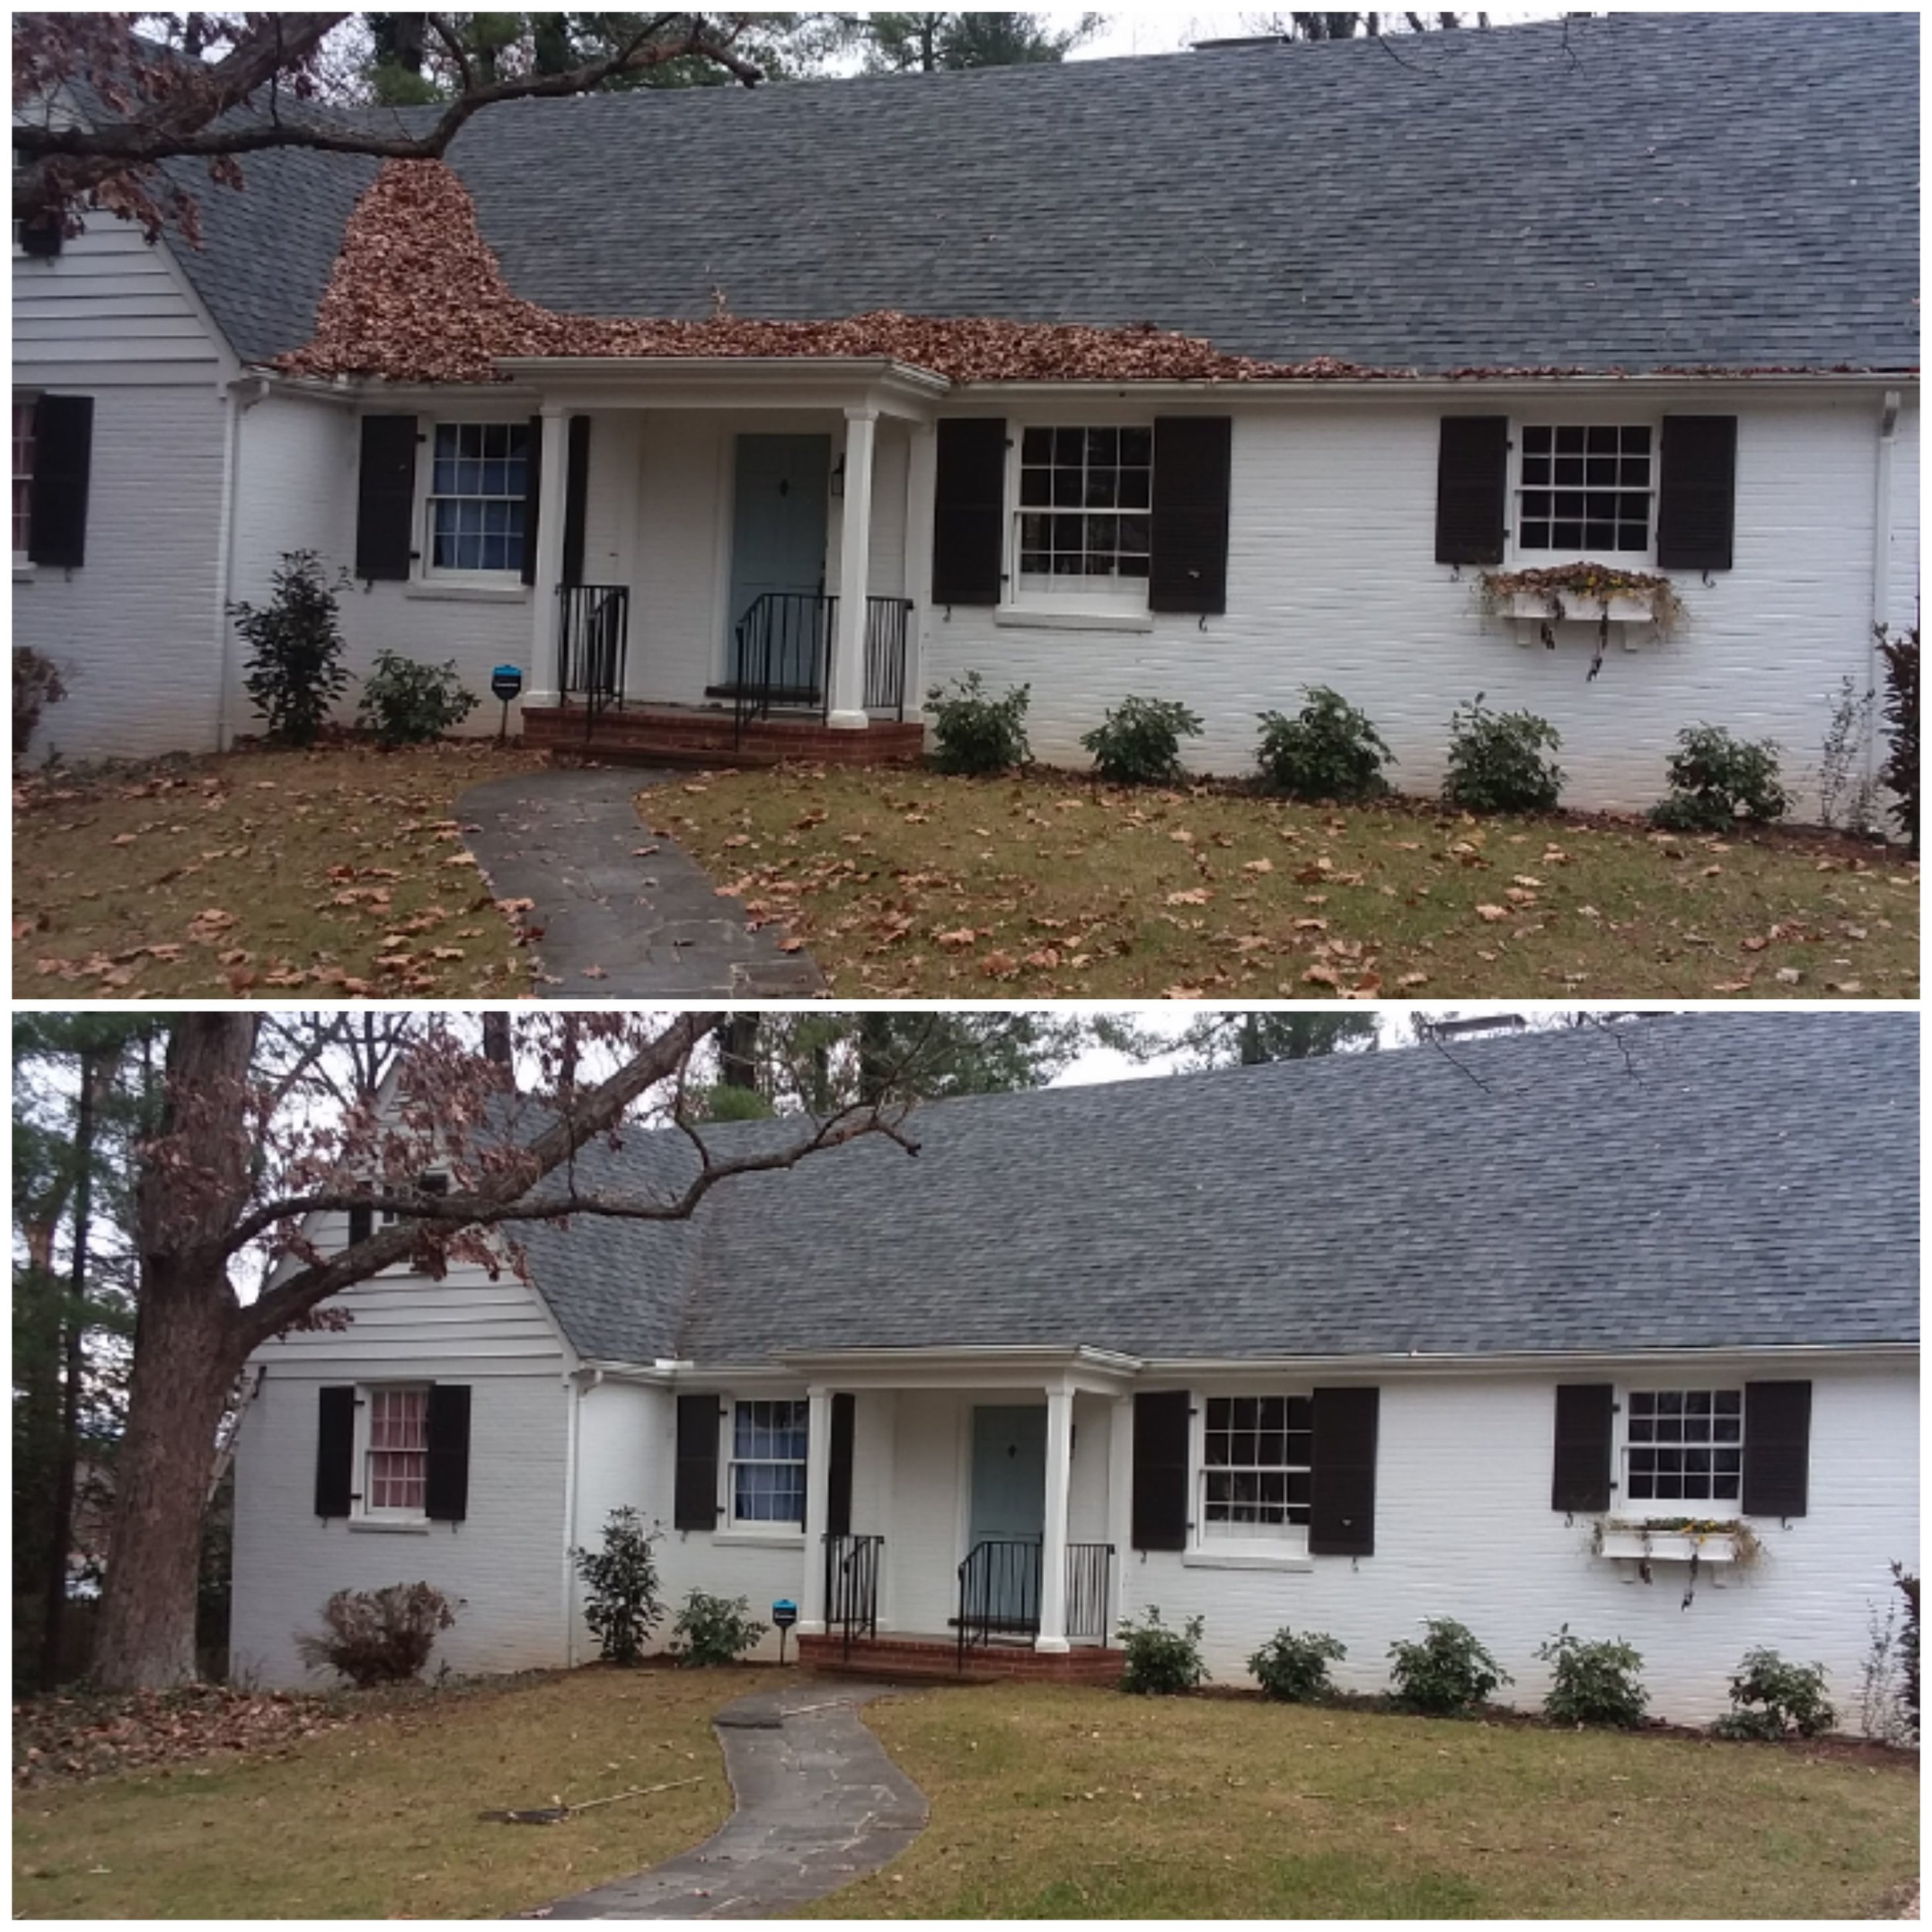 Image of before and after comparison of a house with leaves on the roof and clogged gutters alongside the house with clean roof and gutters in Charlottesville VA